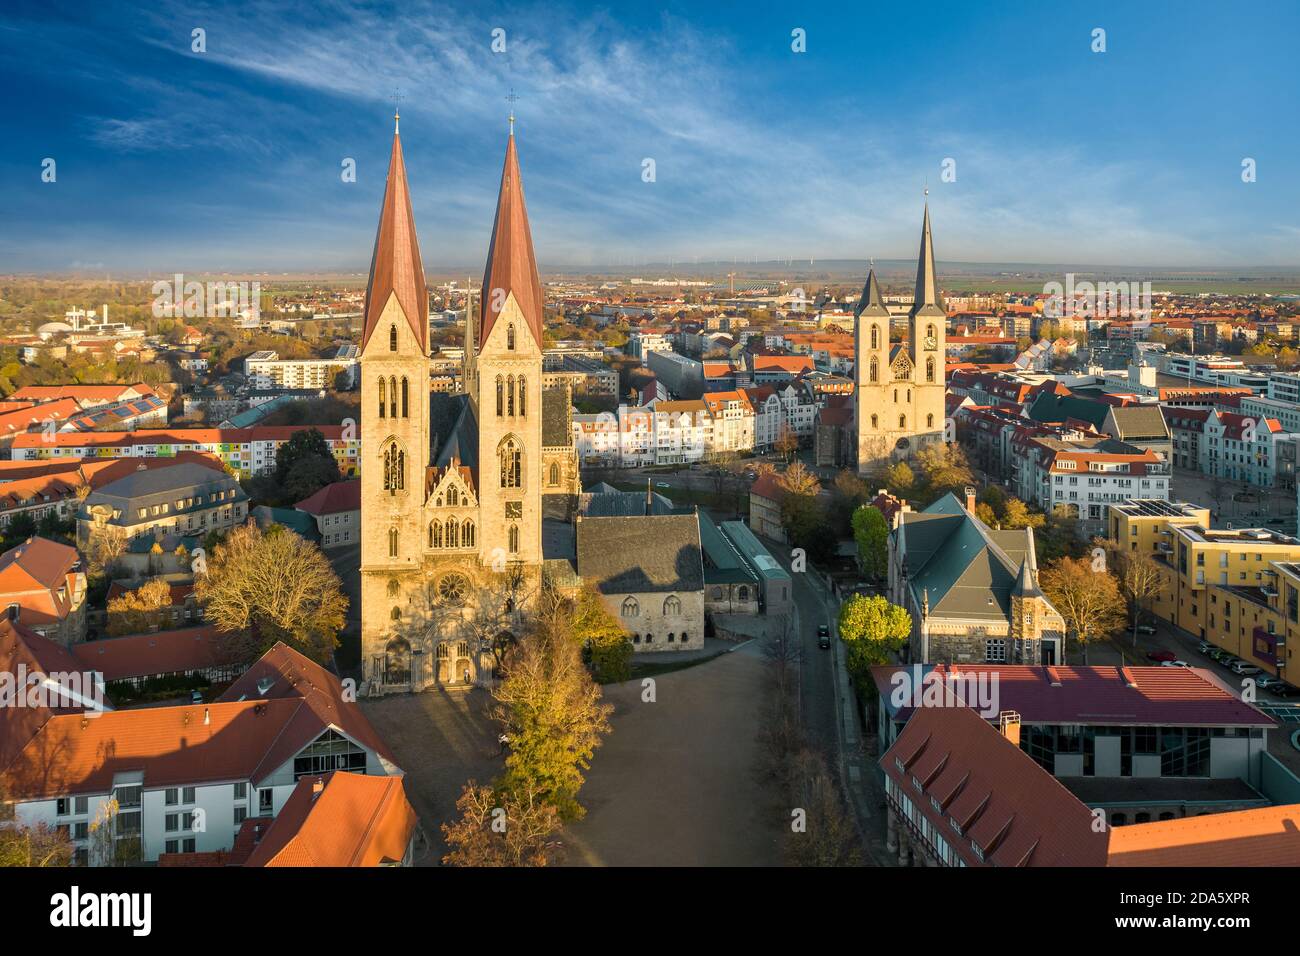 Old town of Halberstadt with its famous Gothic cathedral, Germany Stock Photo